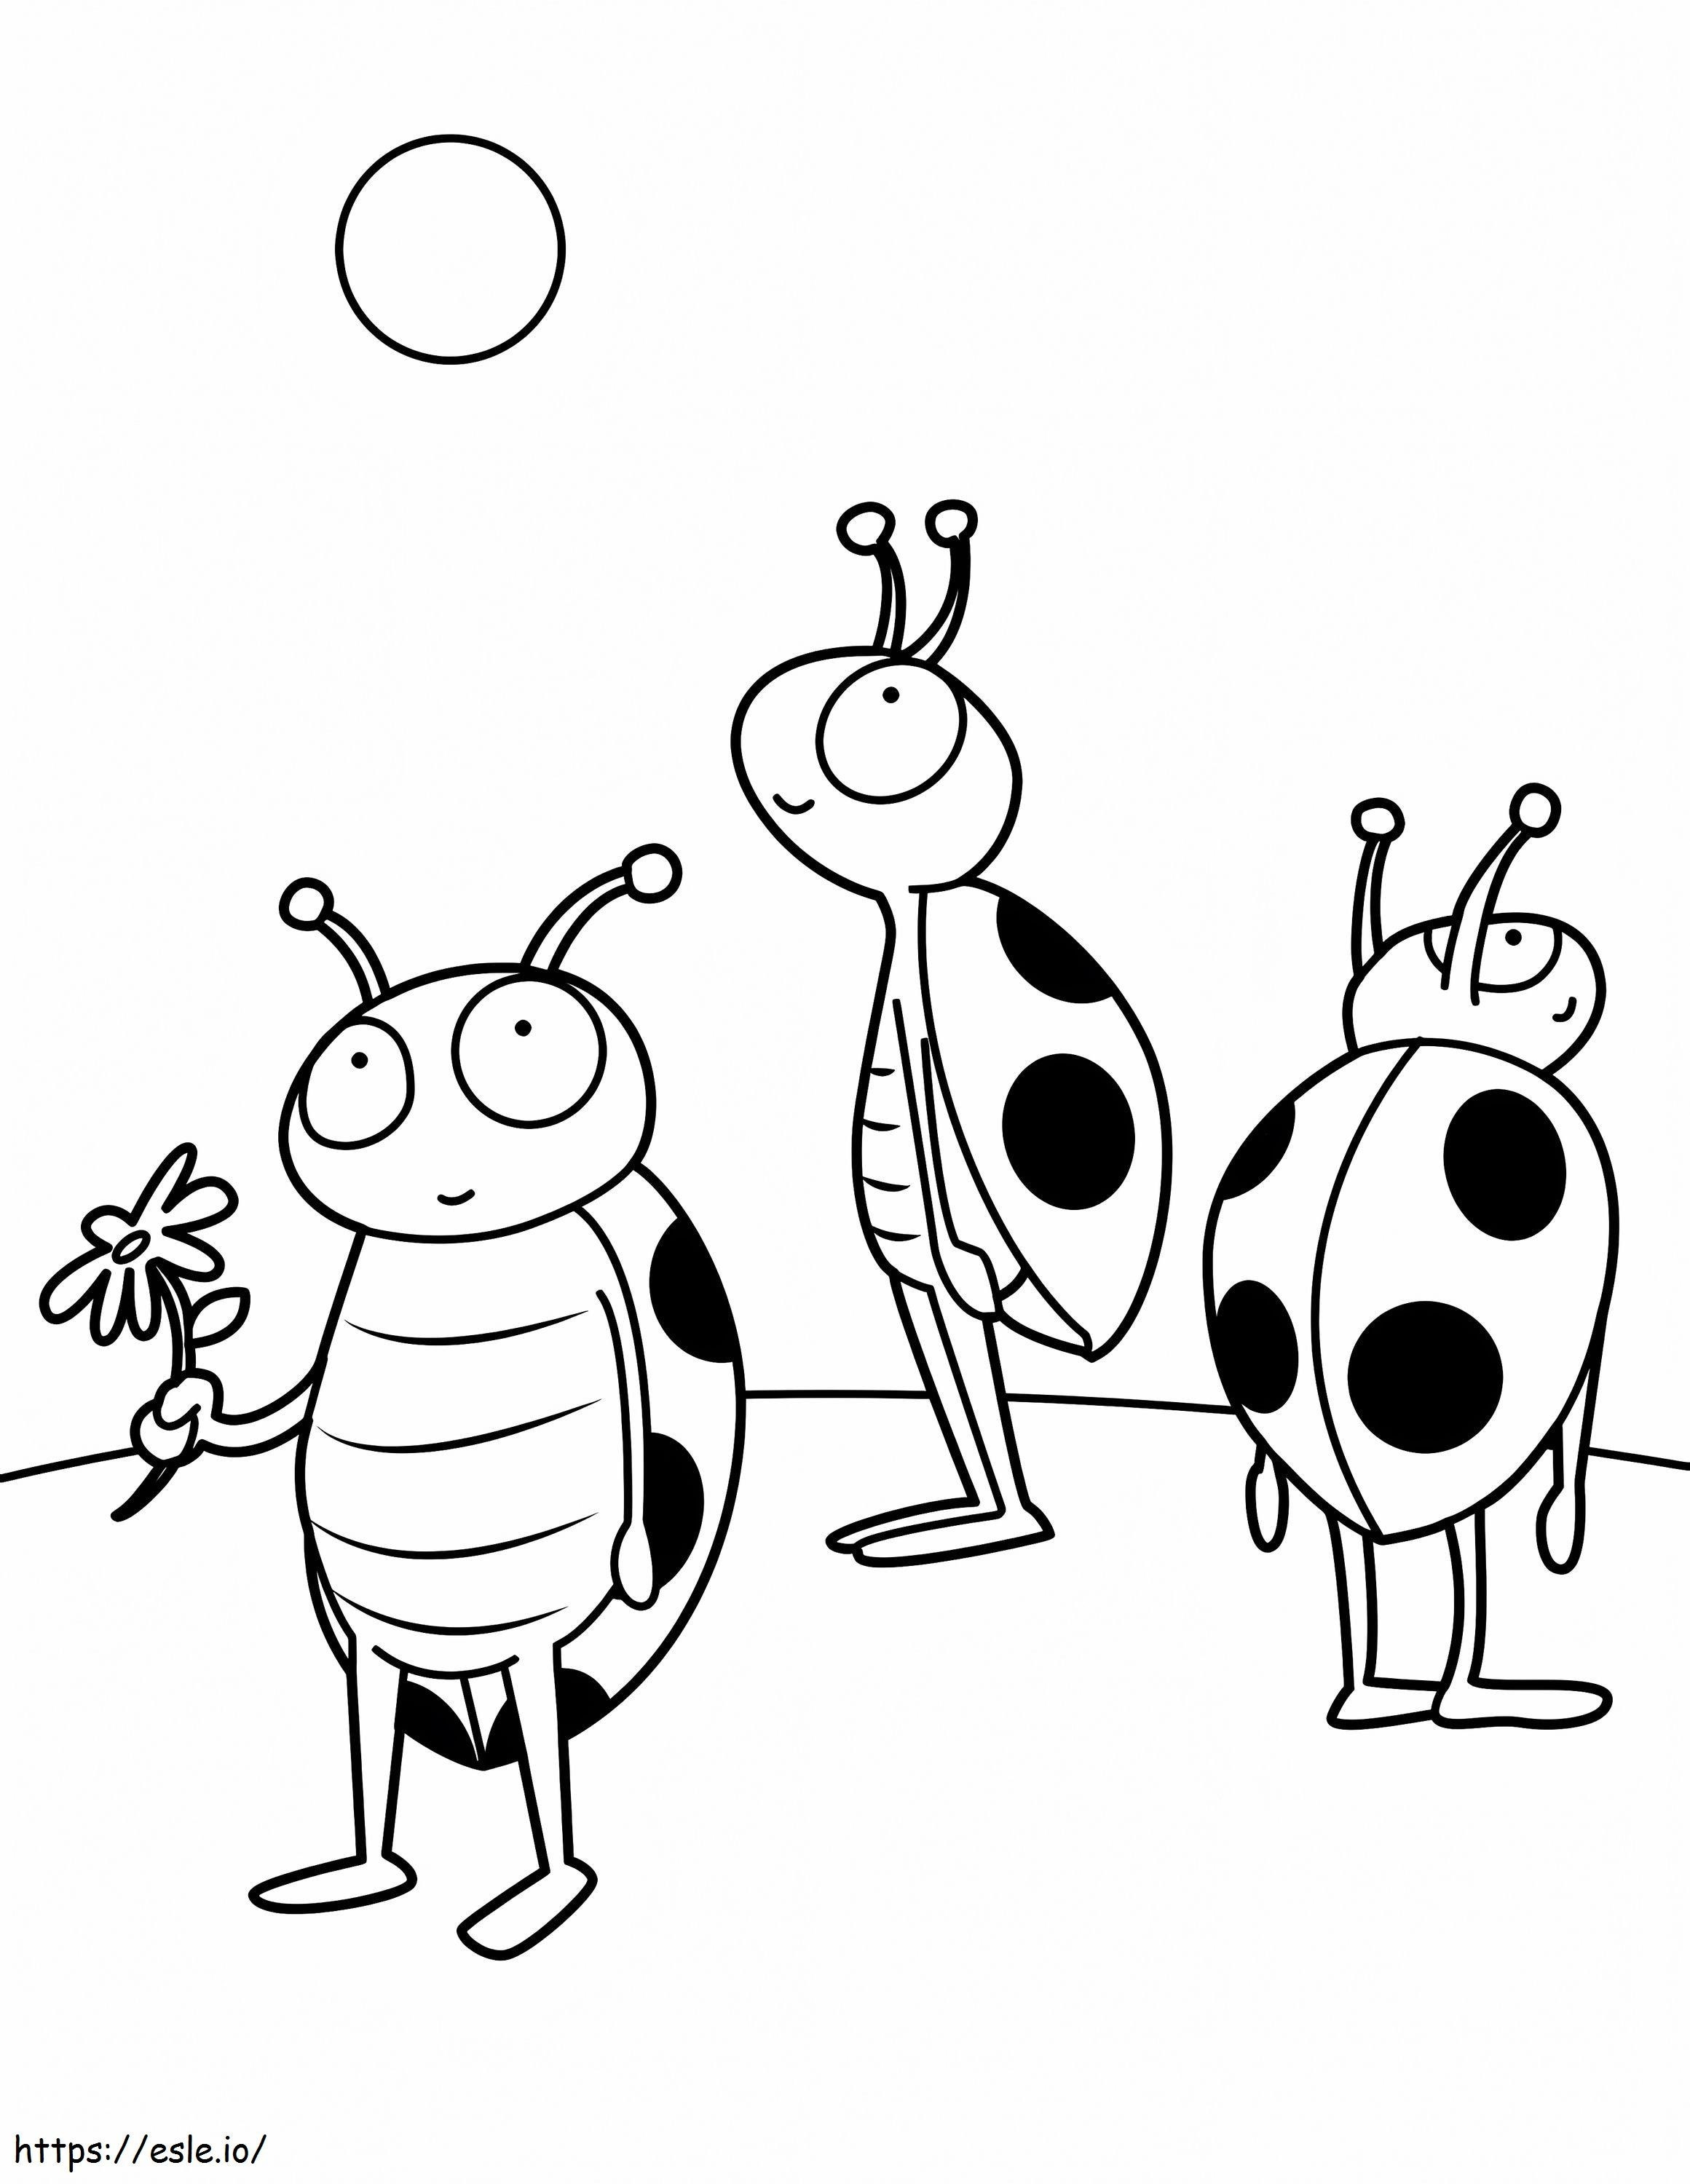 1555728664 Ladybugs Wsy On Insect coloring page